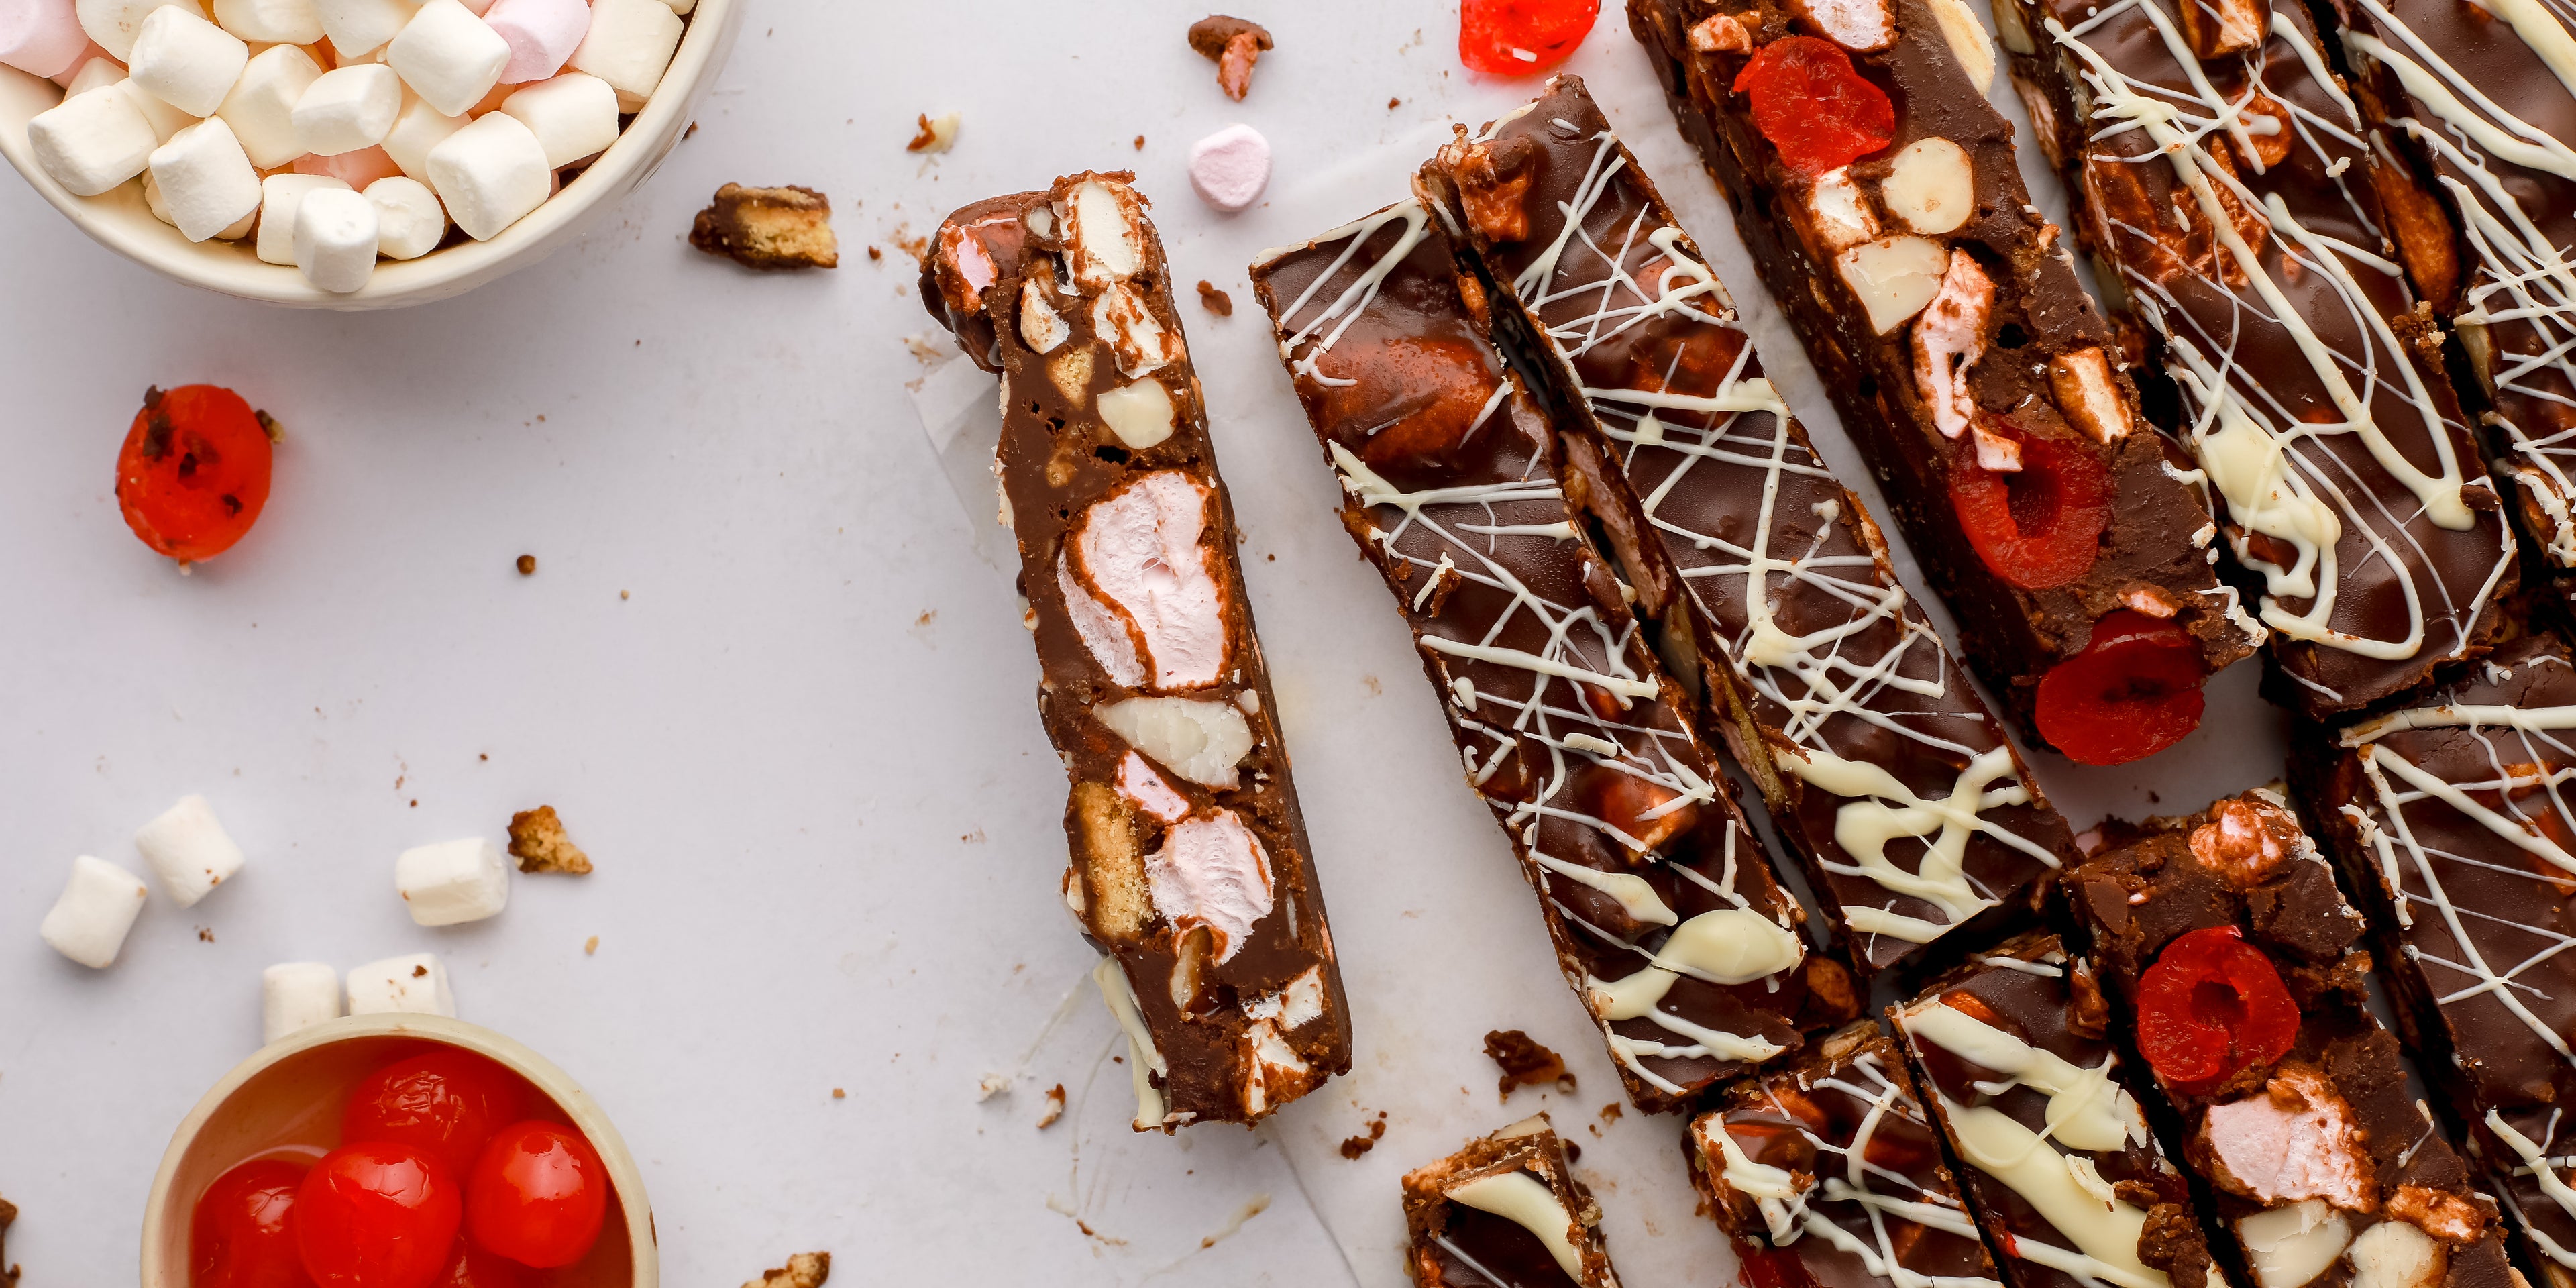 Slices of rocky road beside marshmallows and cherries